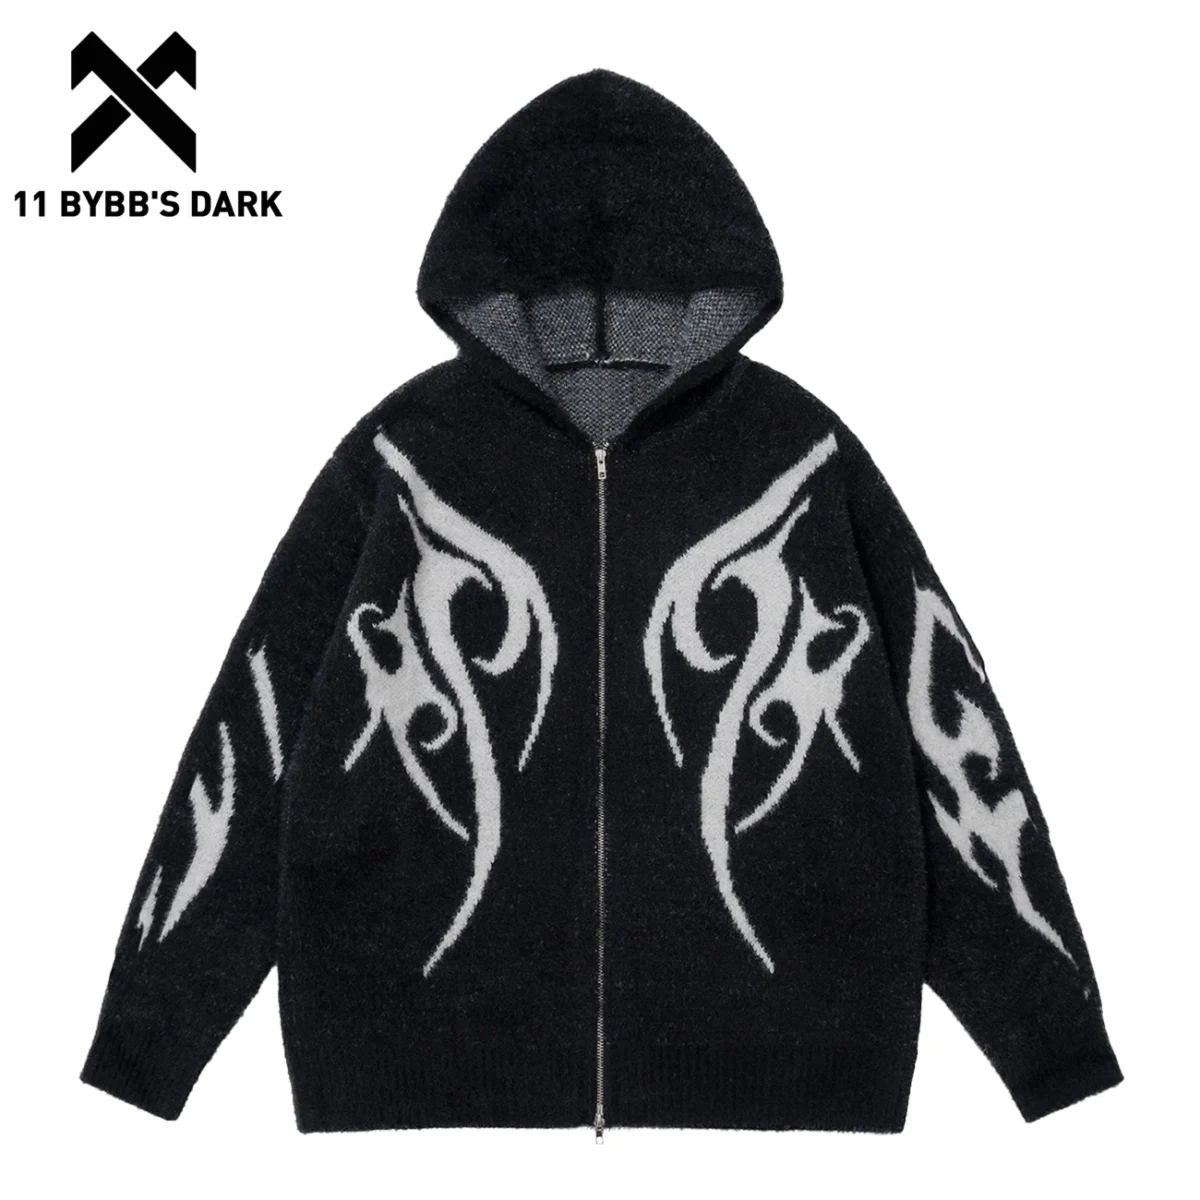 XYXIONGMAO Graphic Hoodies for Men Street Wear Oversized White